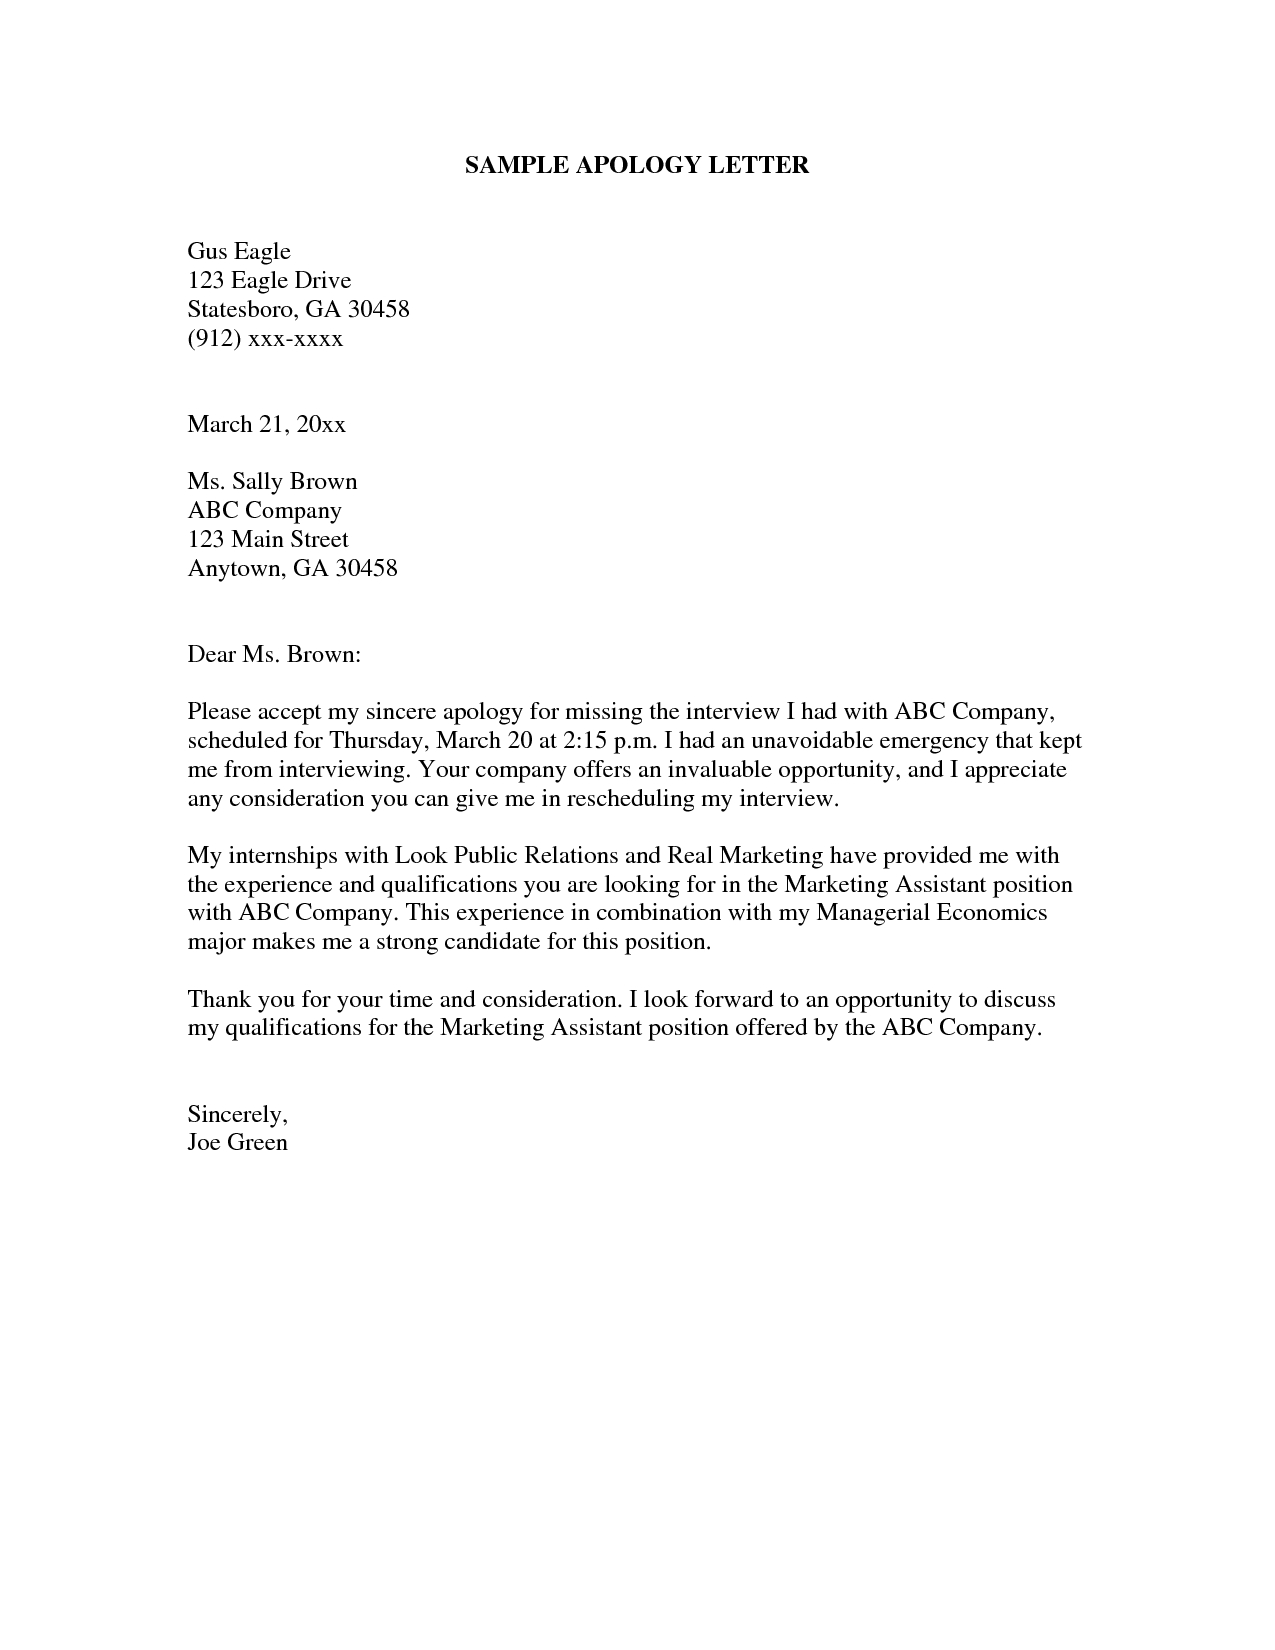 apology acceptance letter sle 28 images apology letter to 